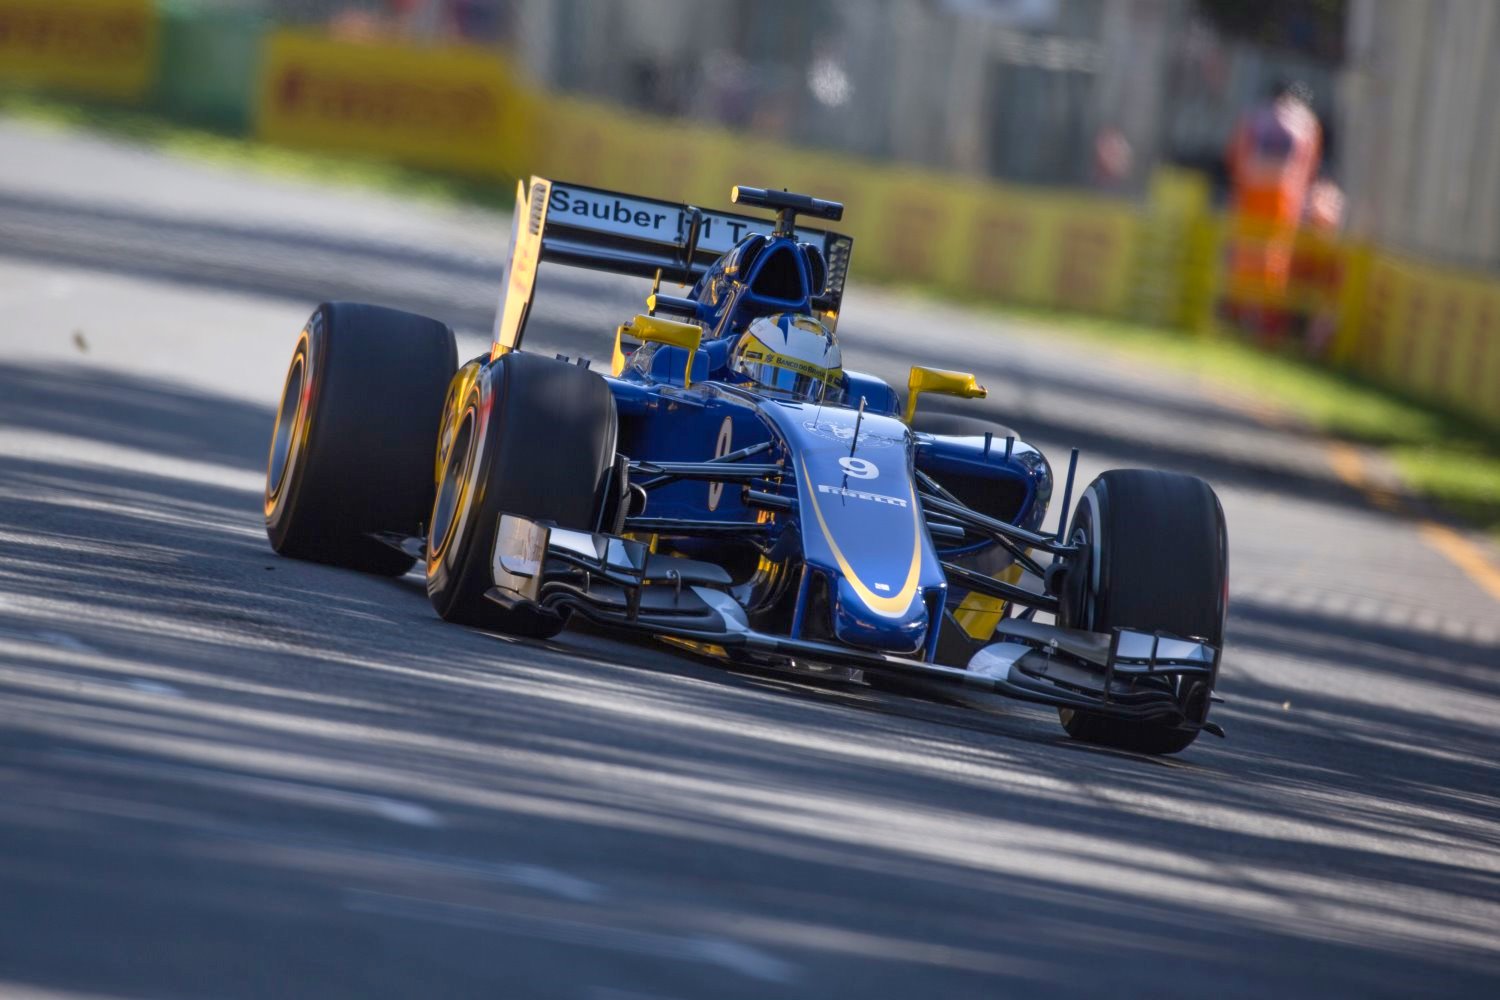 After all the courtroom drame, the Sauber performed fairly well in Melbourne